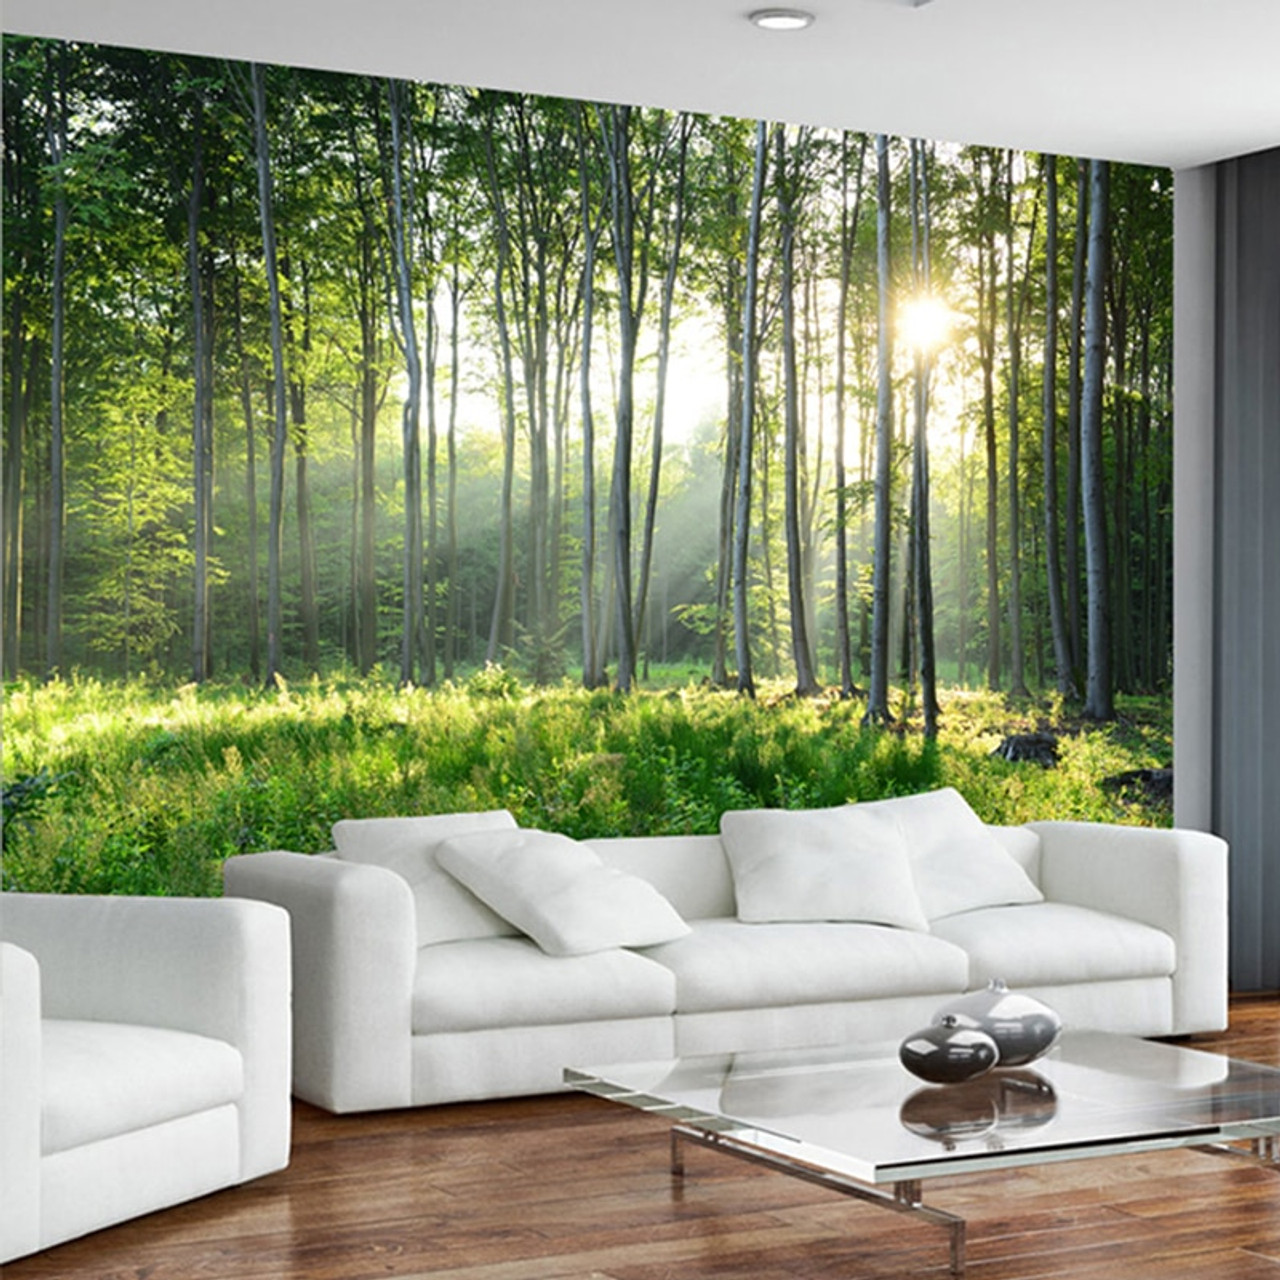 Custom Photo Wallpaper 3D Green Forest Nature Scenery Murals Living Room  Bedroom Background Wall Covering Modern Home Decor 3 D - OnshopDeals.Com